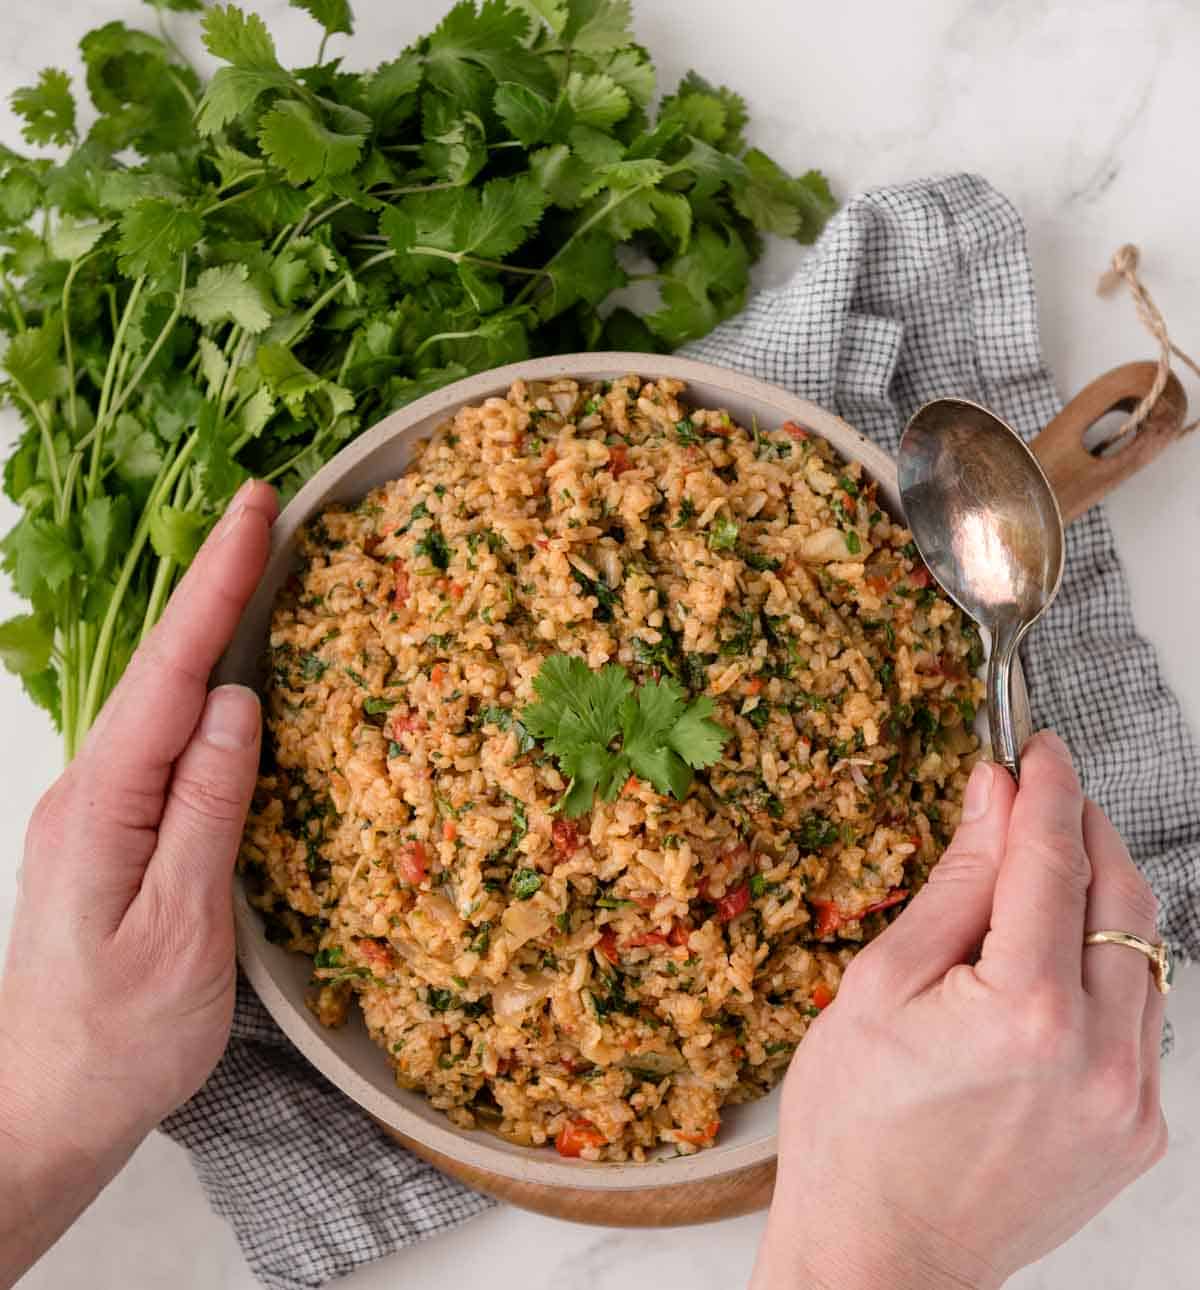 Hands holding bowl of herb tomato rice about to dig into it with a spoon